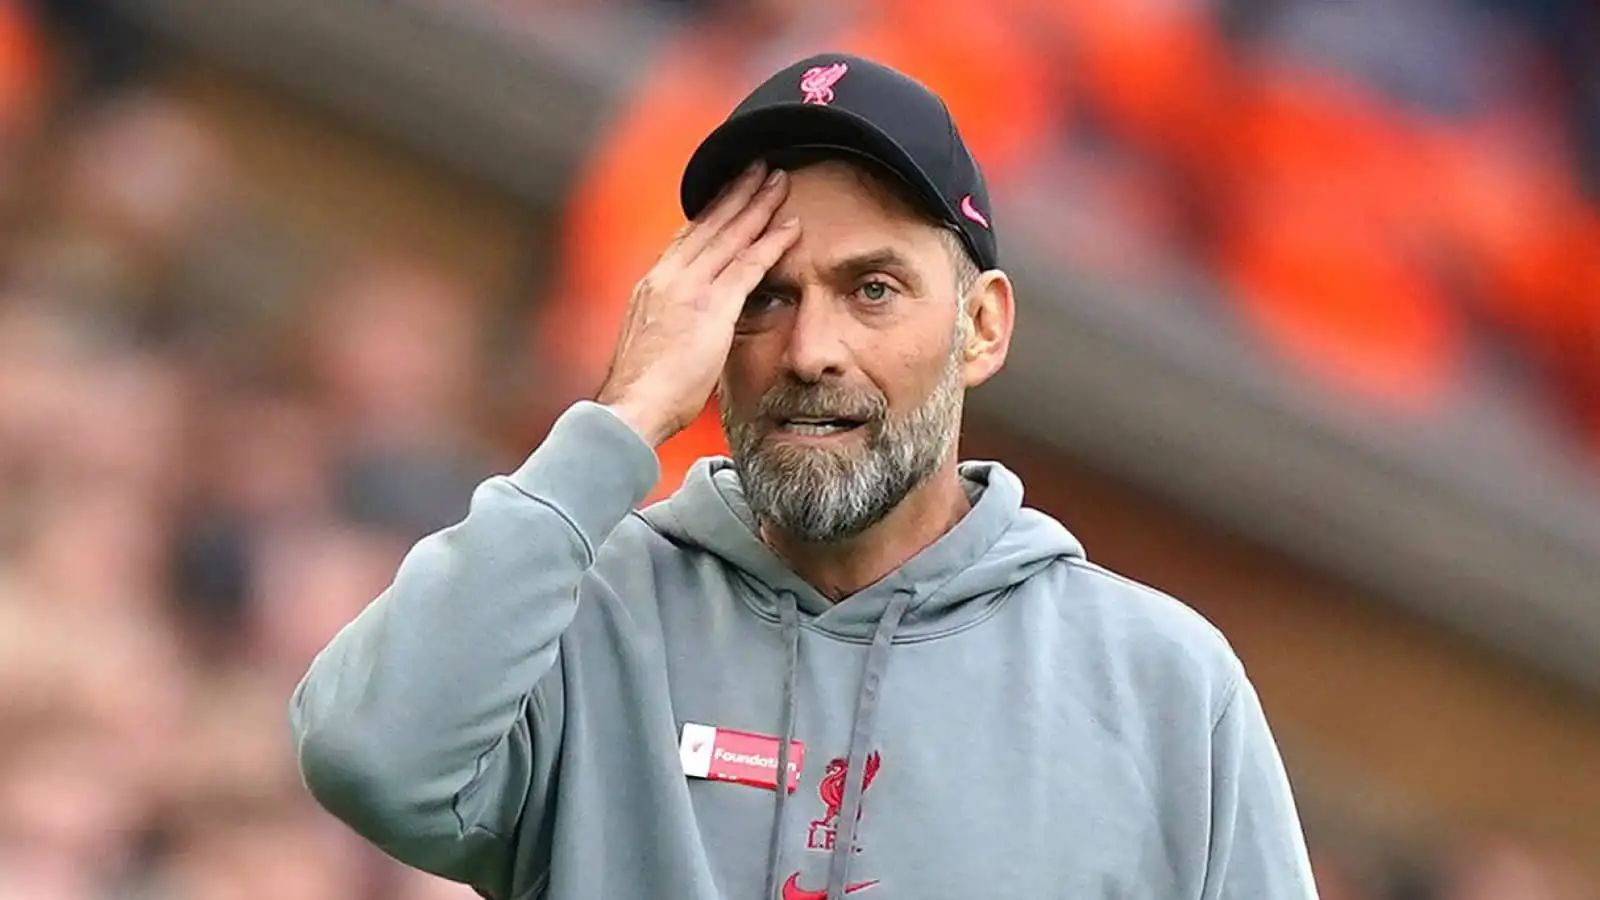 ‘They’ll be speaking to other clubs’: Liverpool told they face player exodus ahead of Klopp exit